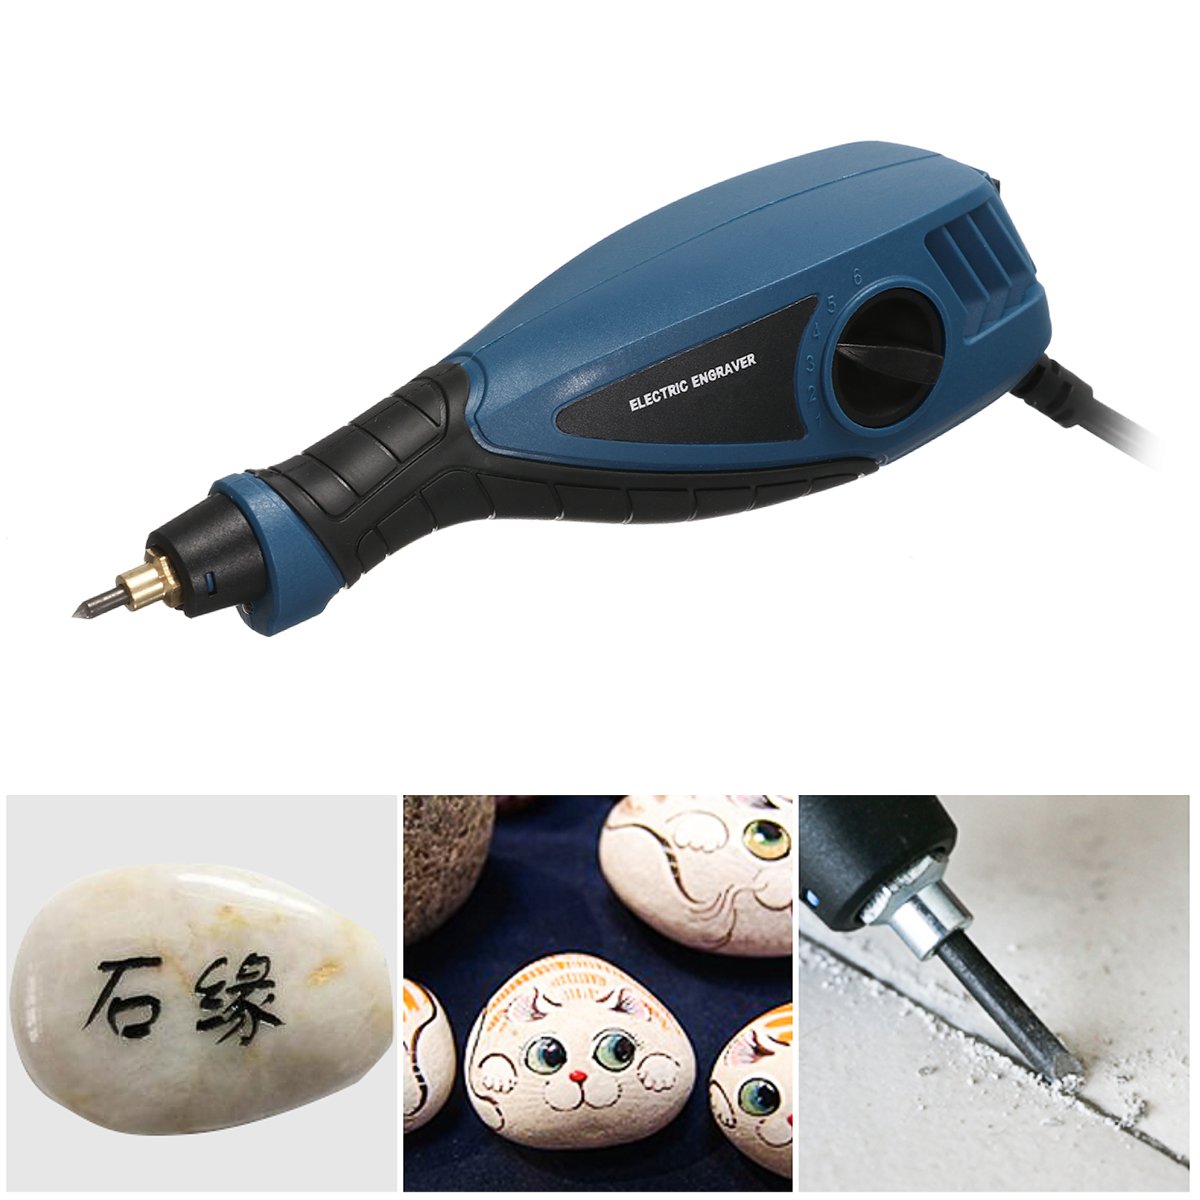 25W-7200RPM-Small-Electric-Engraving-Pen-Metal-Cutting-Plotter-Carving-Pen-Engraving-Tool-1586528